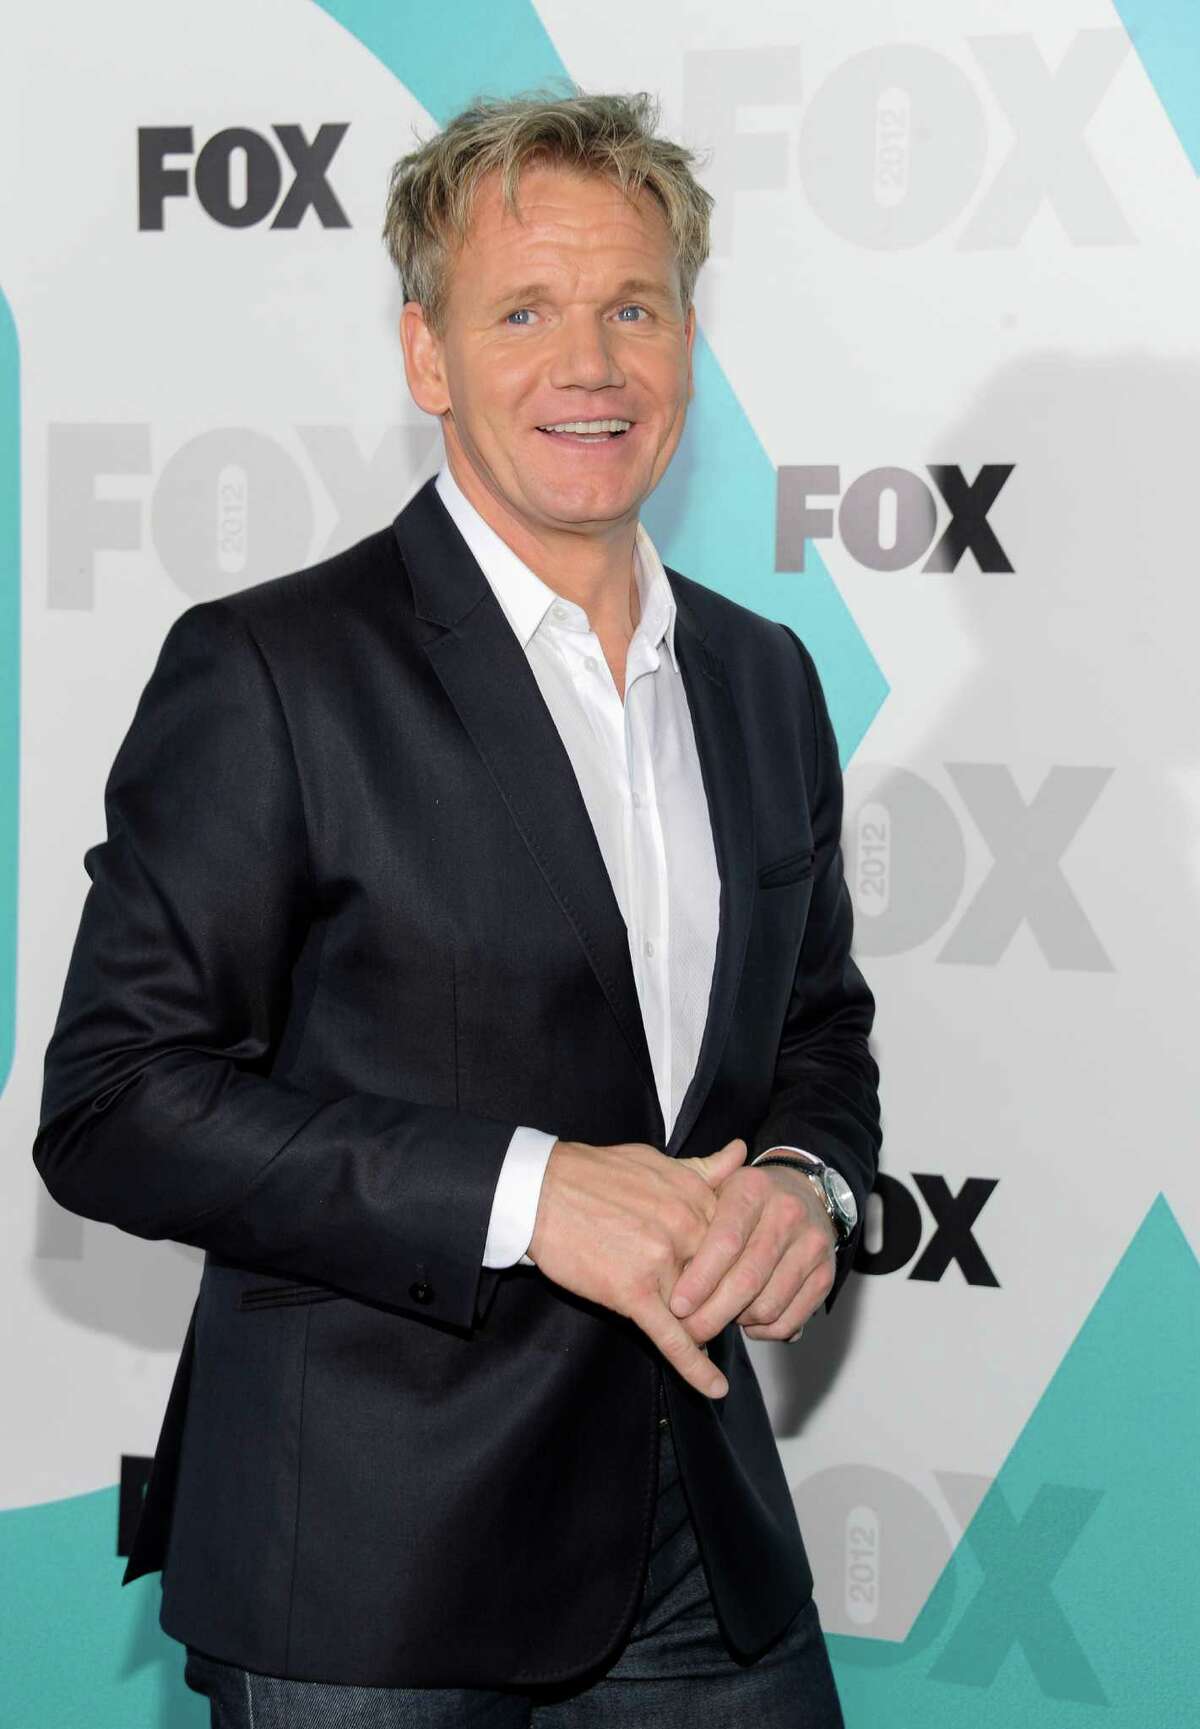 Chef Gordon Ramsay from "Kitchen Nightmares" and "MasterChef" attends the FOX network upfront presentation party at Wollman Rink, Monday, May 14, 2012 in New York.